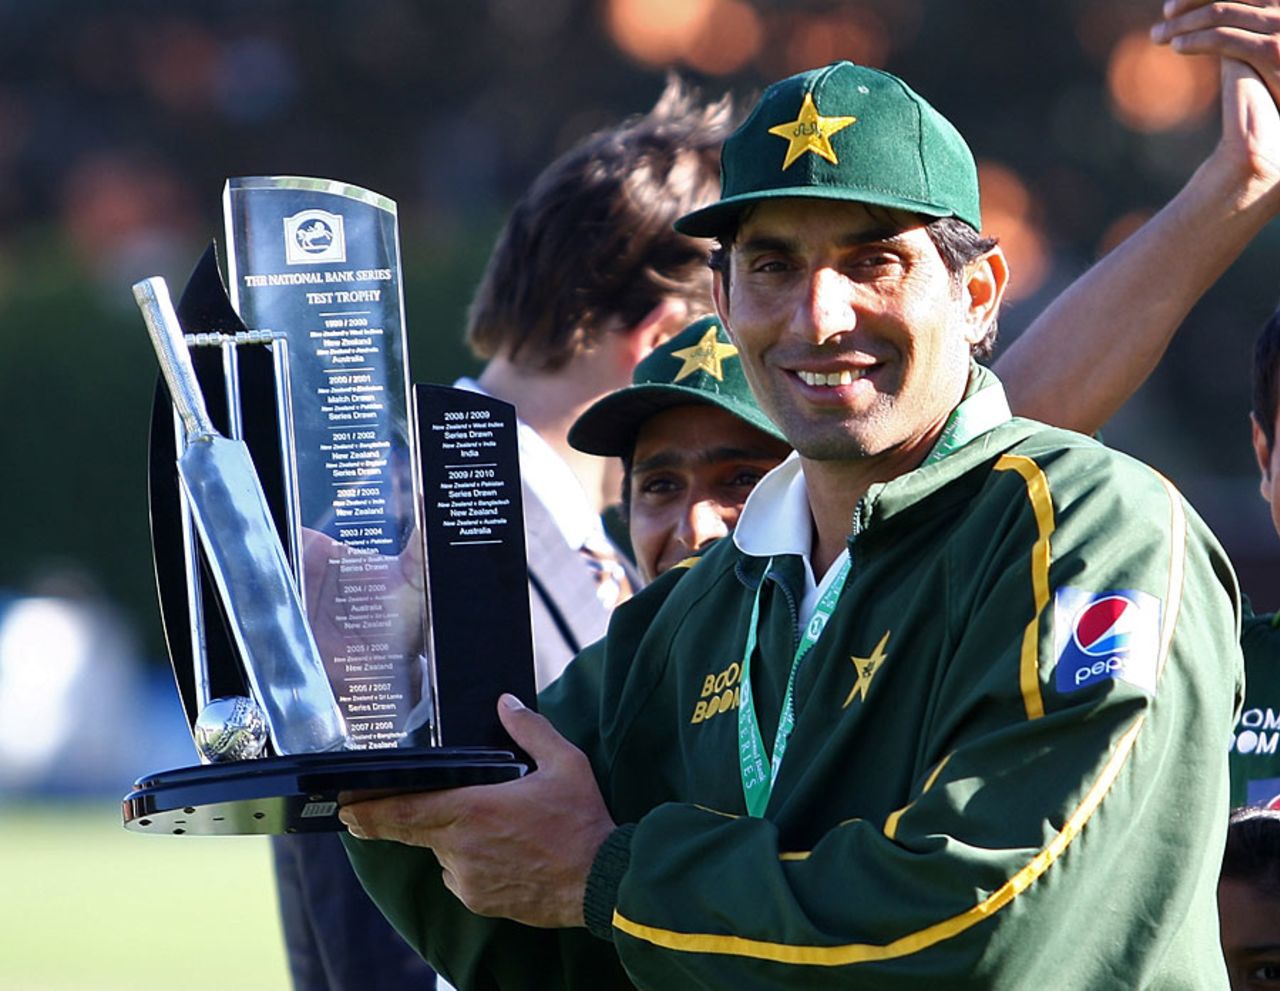 The draw gave Misbah-ul-Haq his first series win as captain and Pakistan's first since 2006, New Zealand v Pakistan, 2nd Test, Wellington, 5th day, January 19, 2011